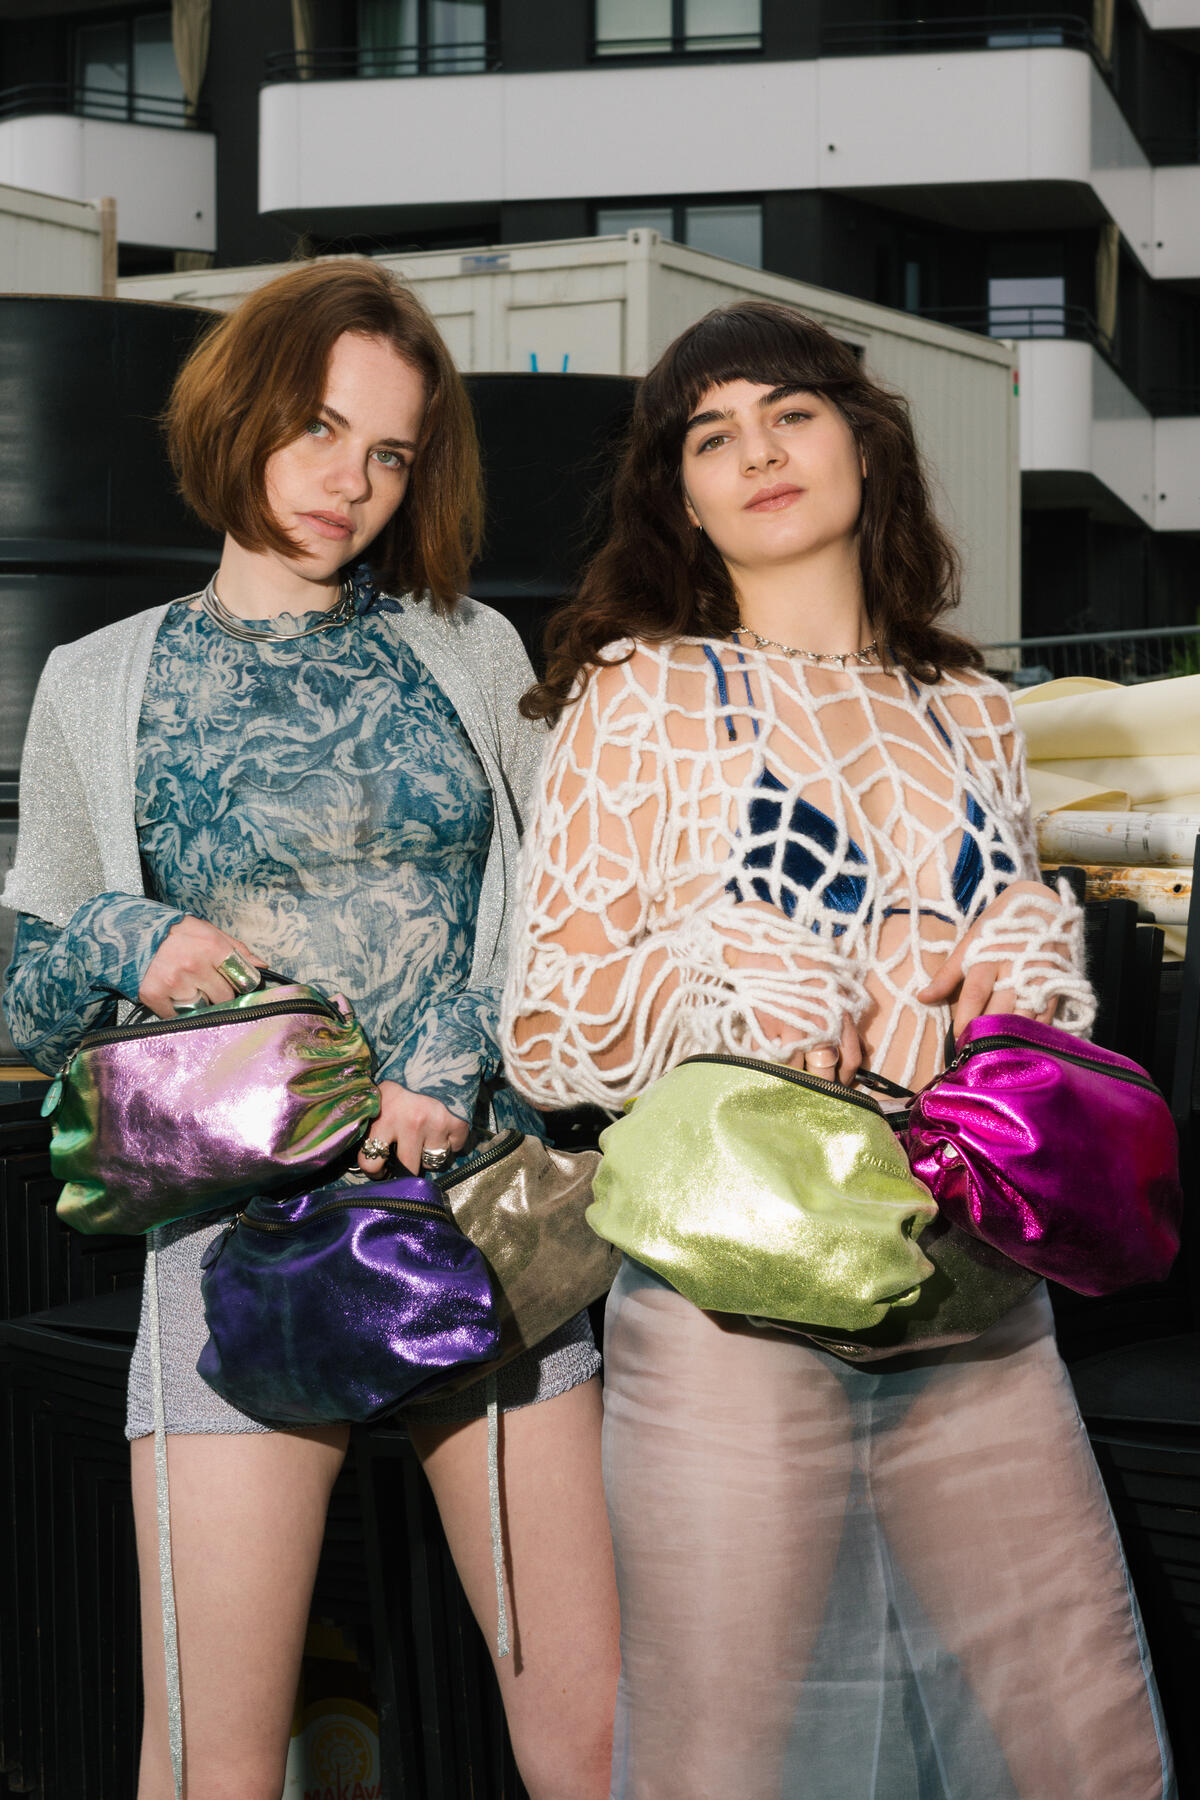 Two women standing in front of a building, holding shiny, colorful INA KENT drawstring bags. They are wearing stylish outfits and looking directly at the camera.